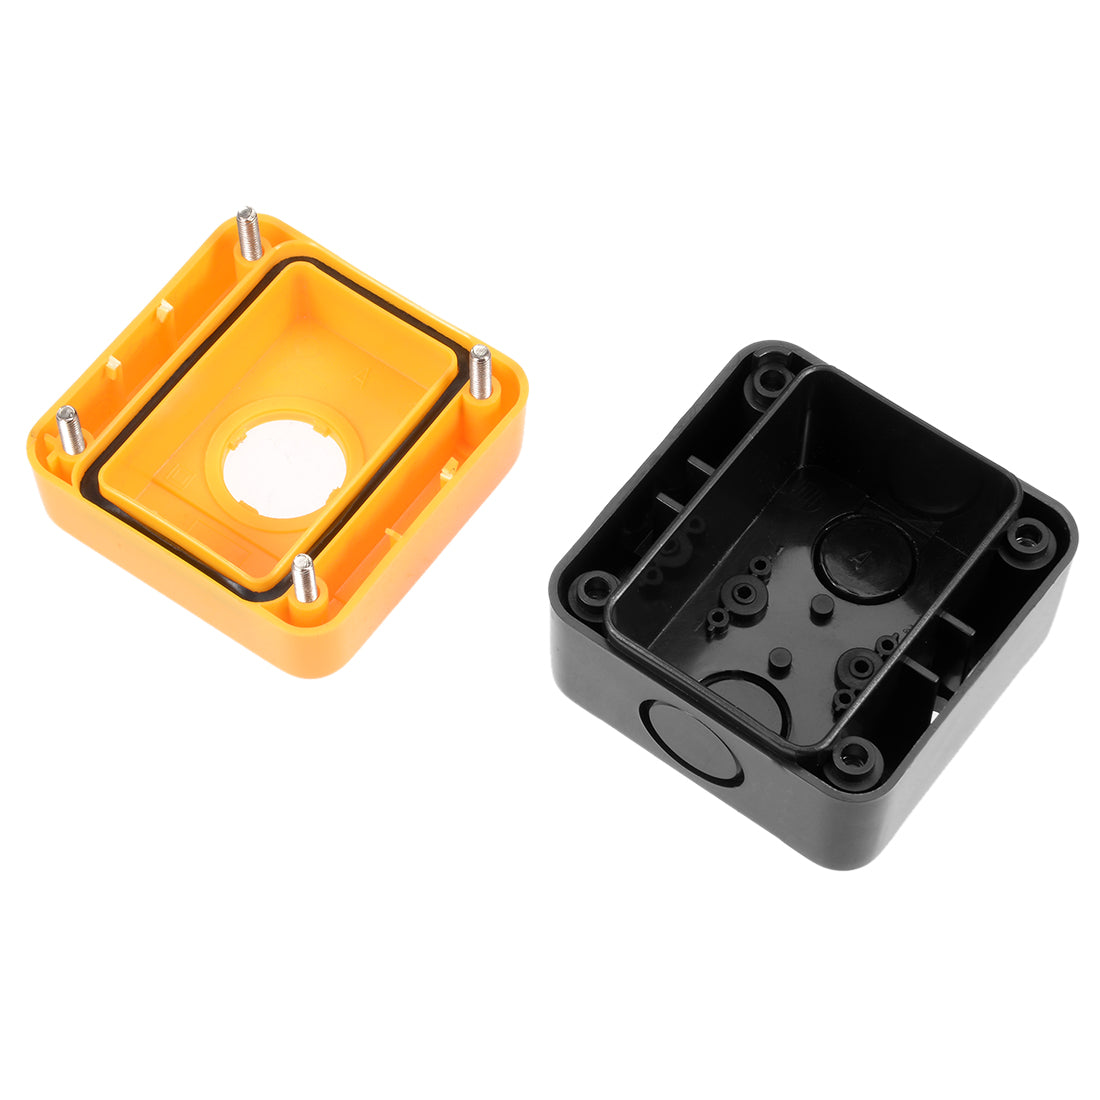 uxcell Uxcell Push Button Switch Control Station Box 22mm 1 Button Hole Waterproof Yellow and Black